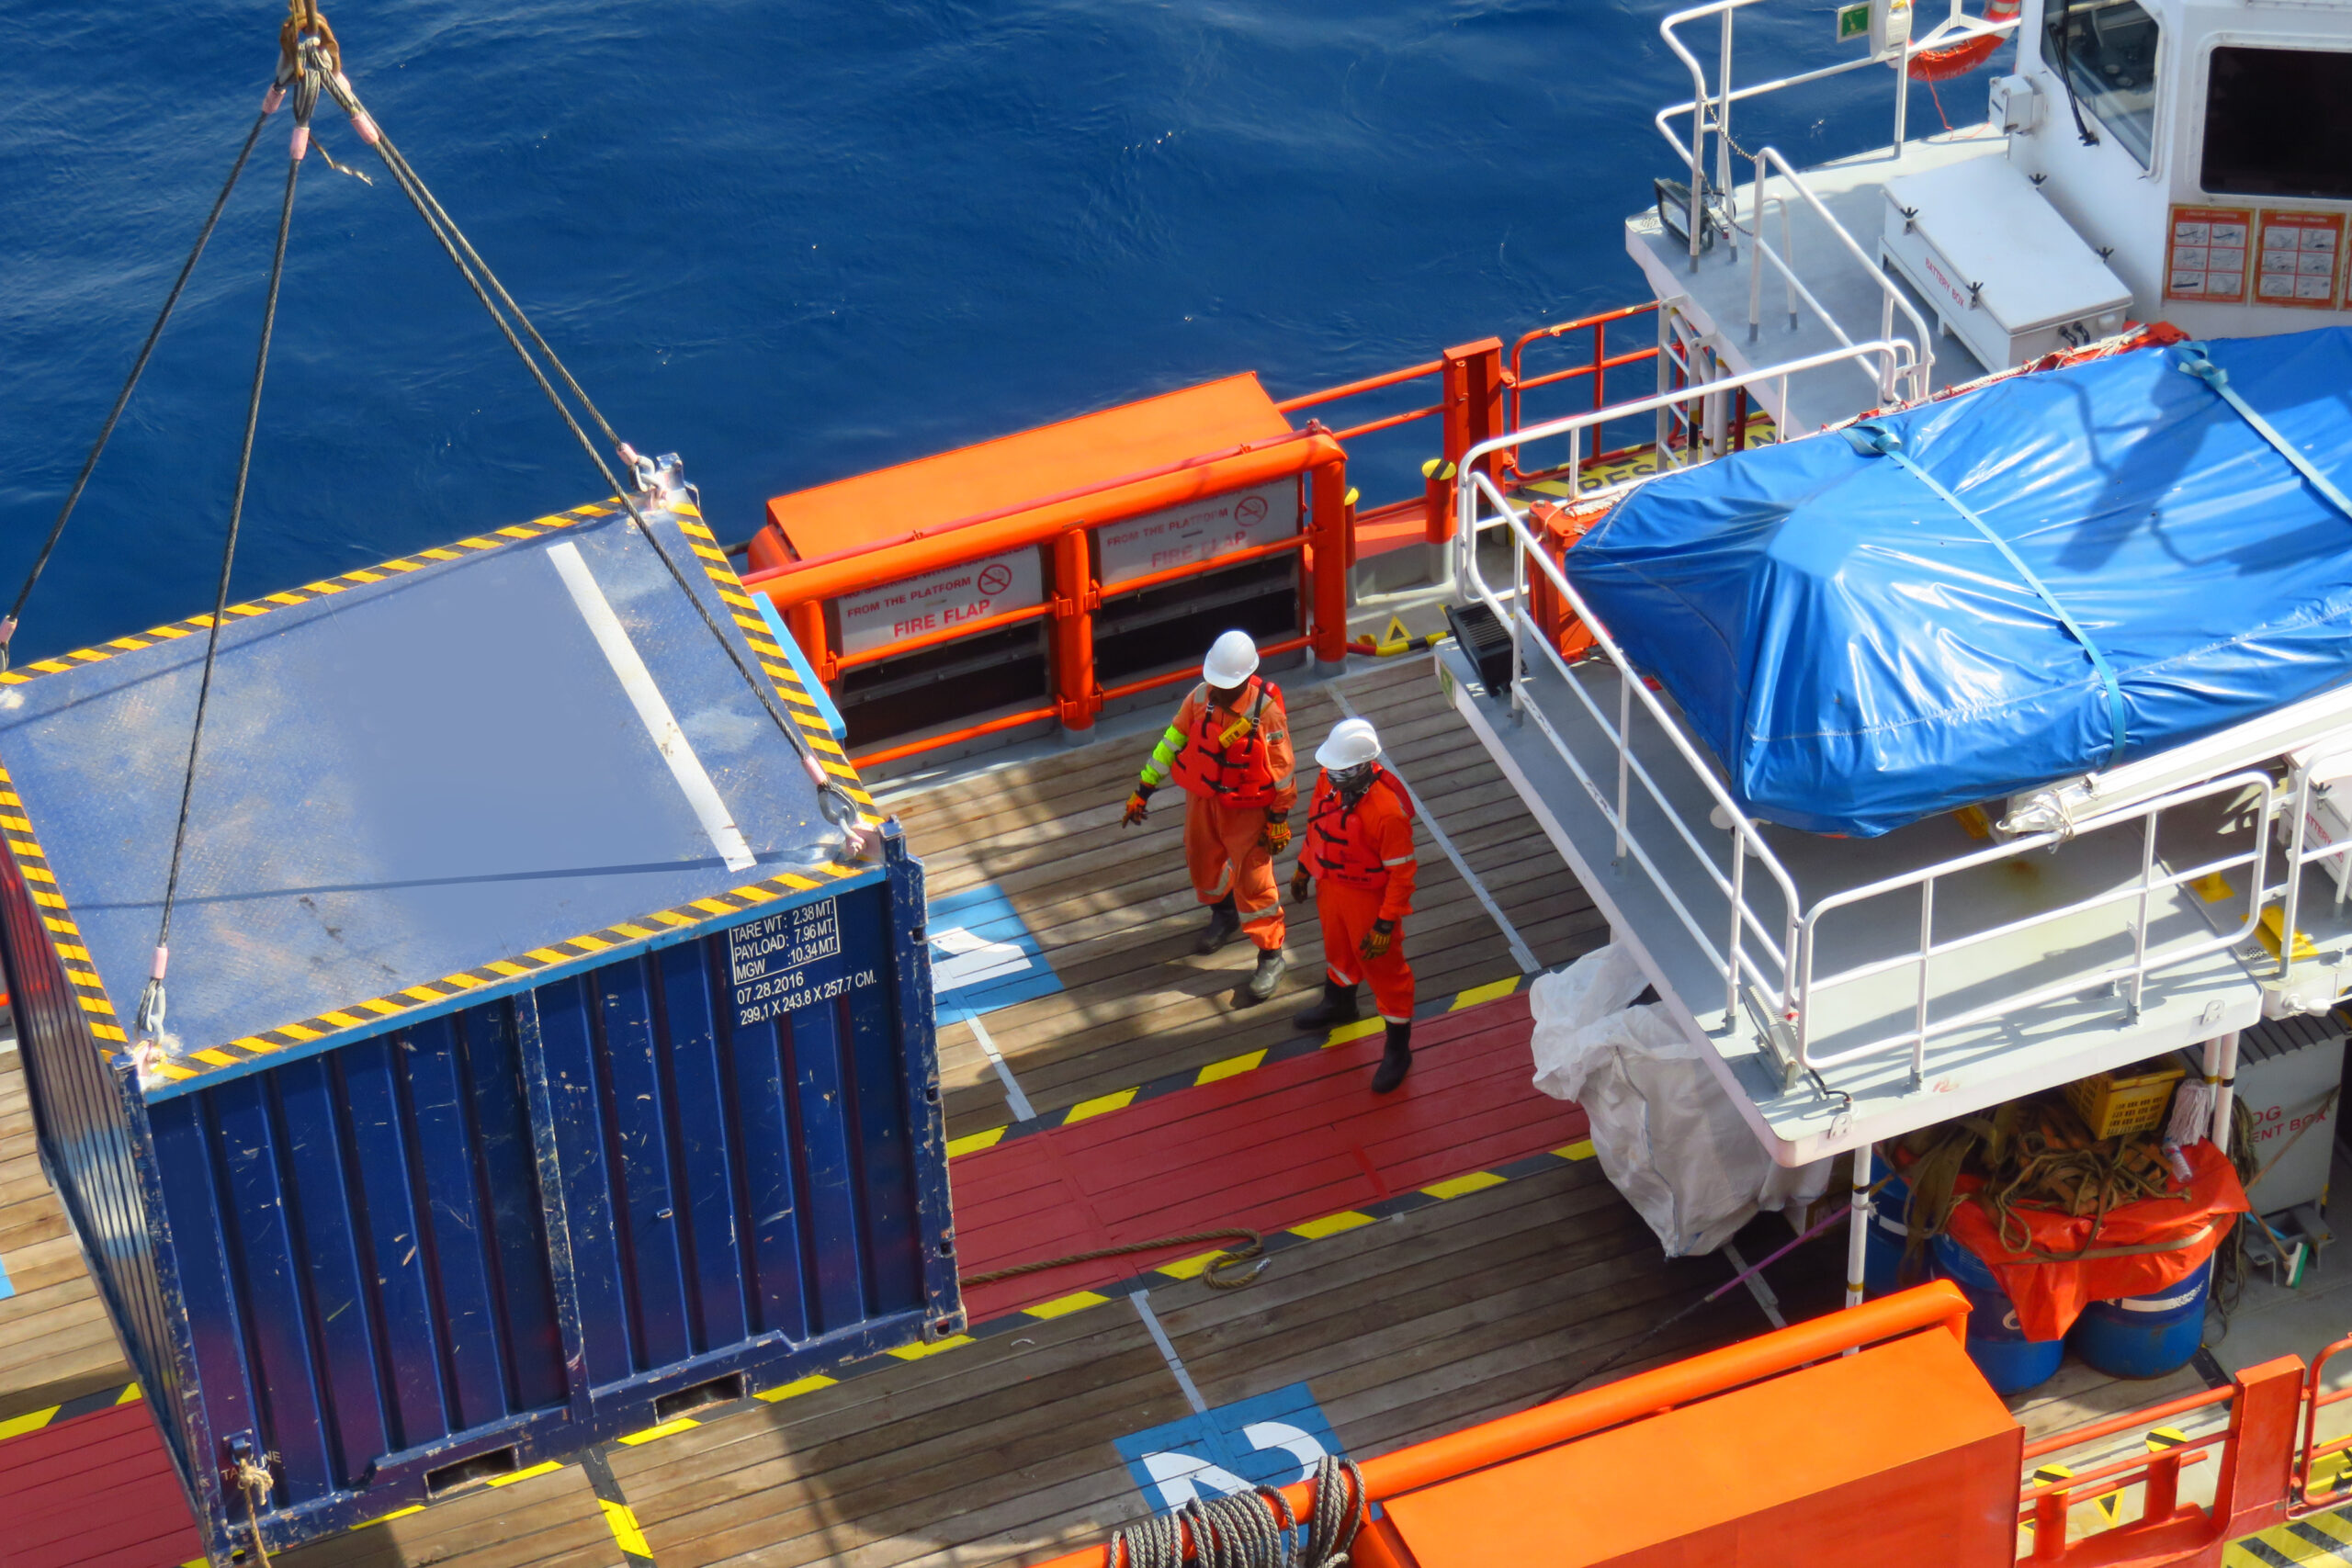 Supply Boat Transfers Cargo to Oil and Gas Industry